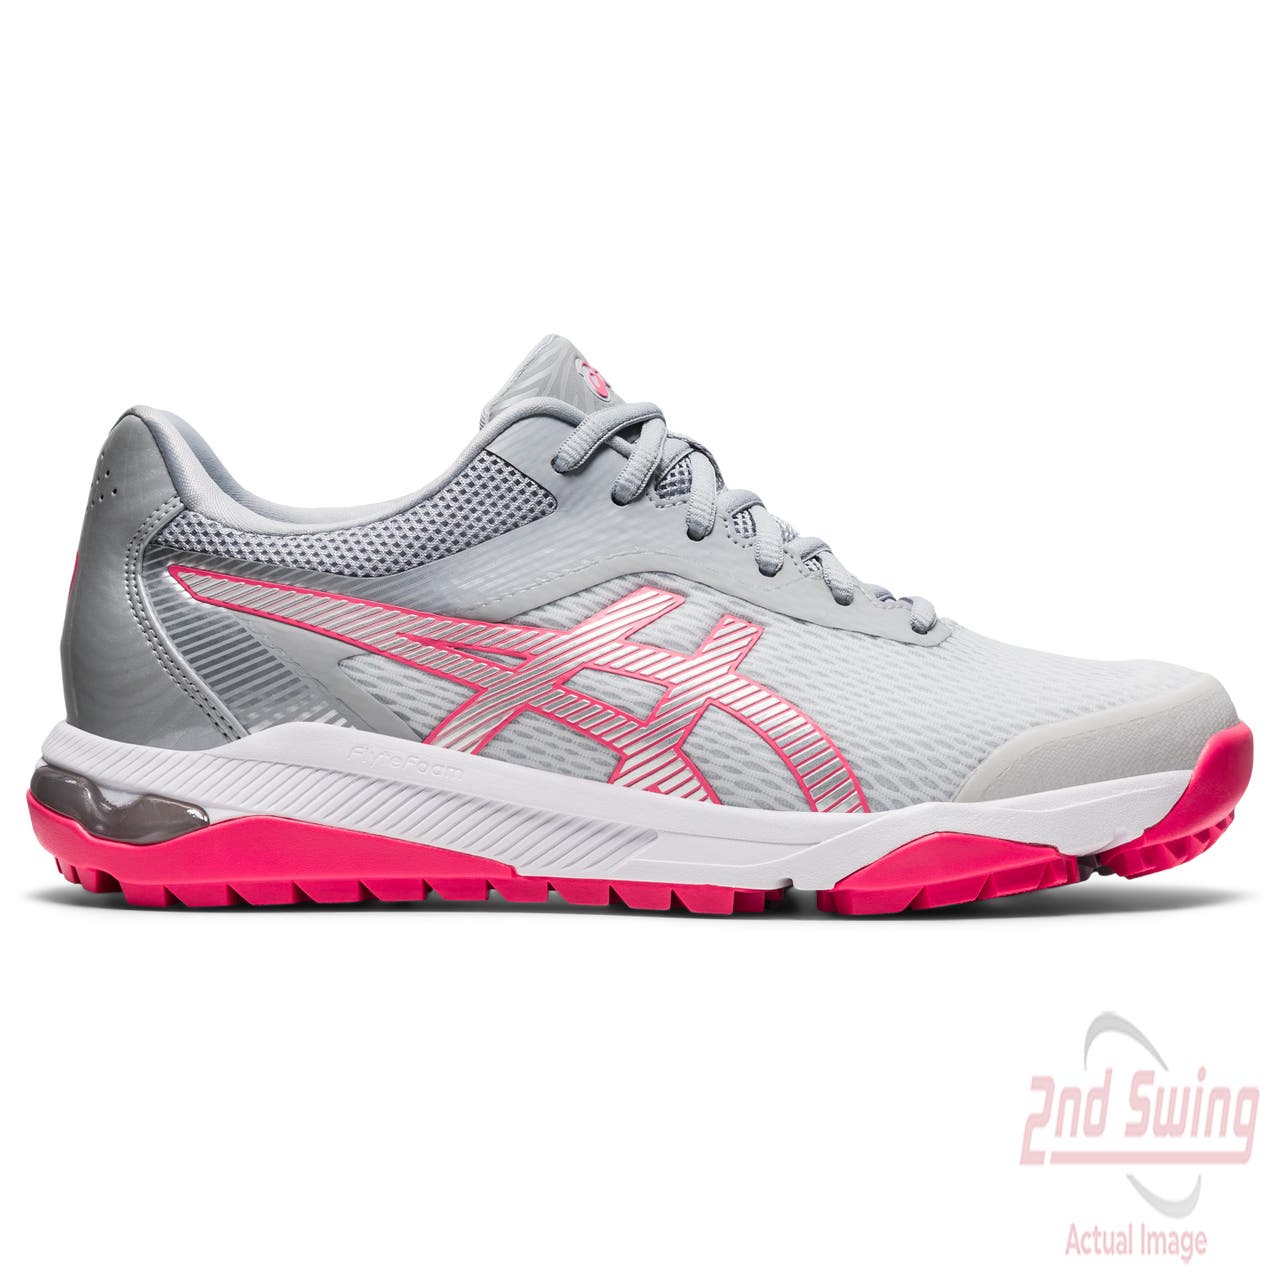 New Womens Golf Shoe Asics GEL Course ACe Medium 7 Glacial Grey/Pink Cameo MSRP $150